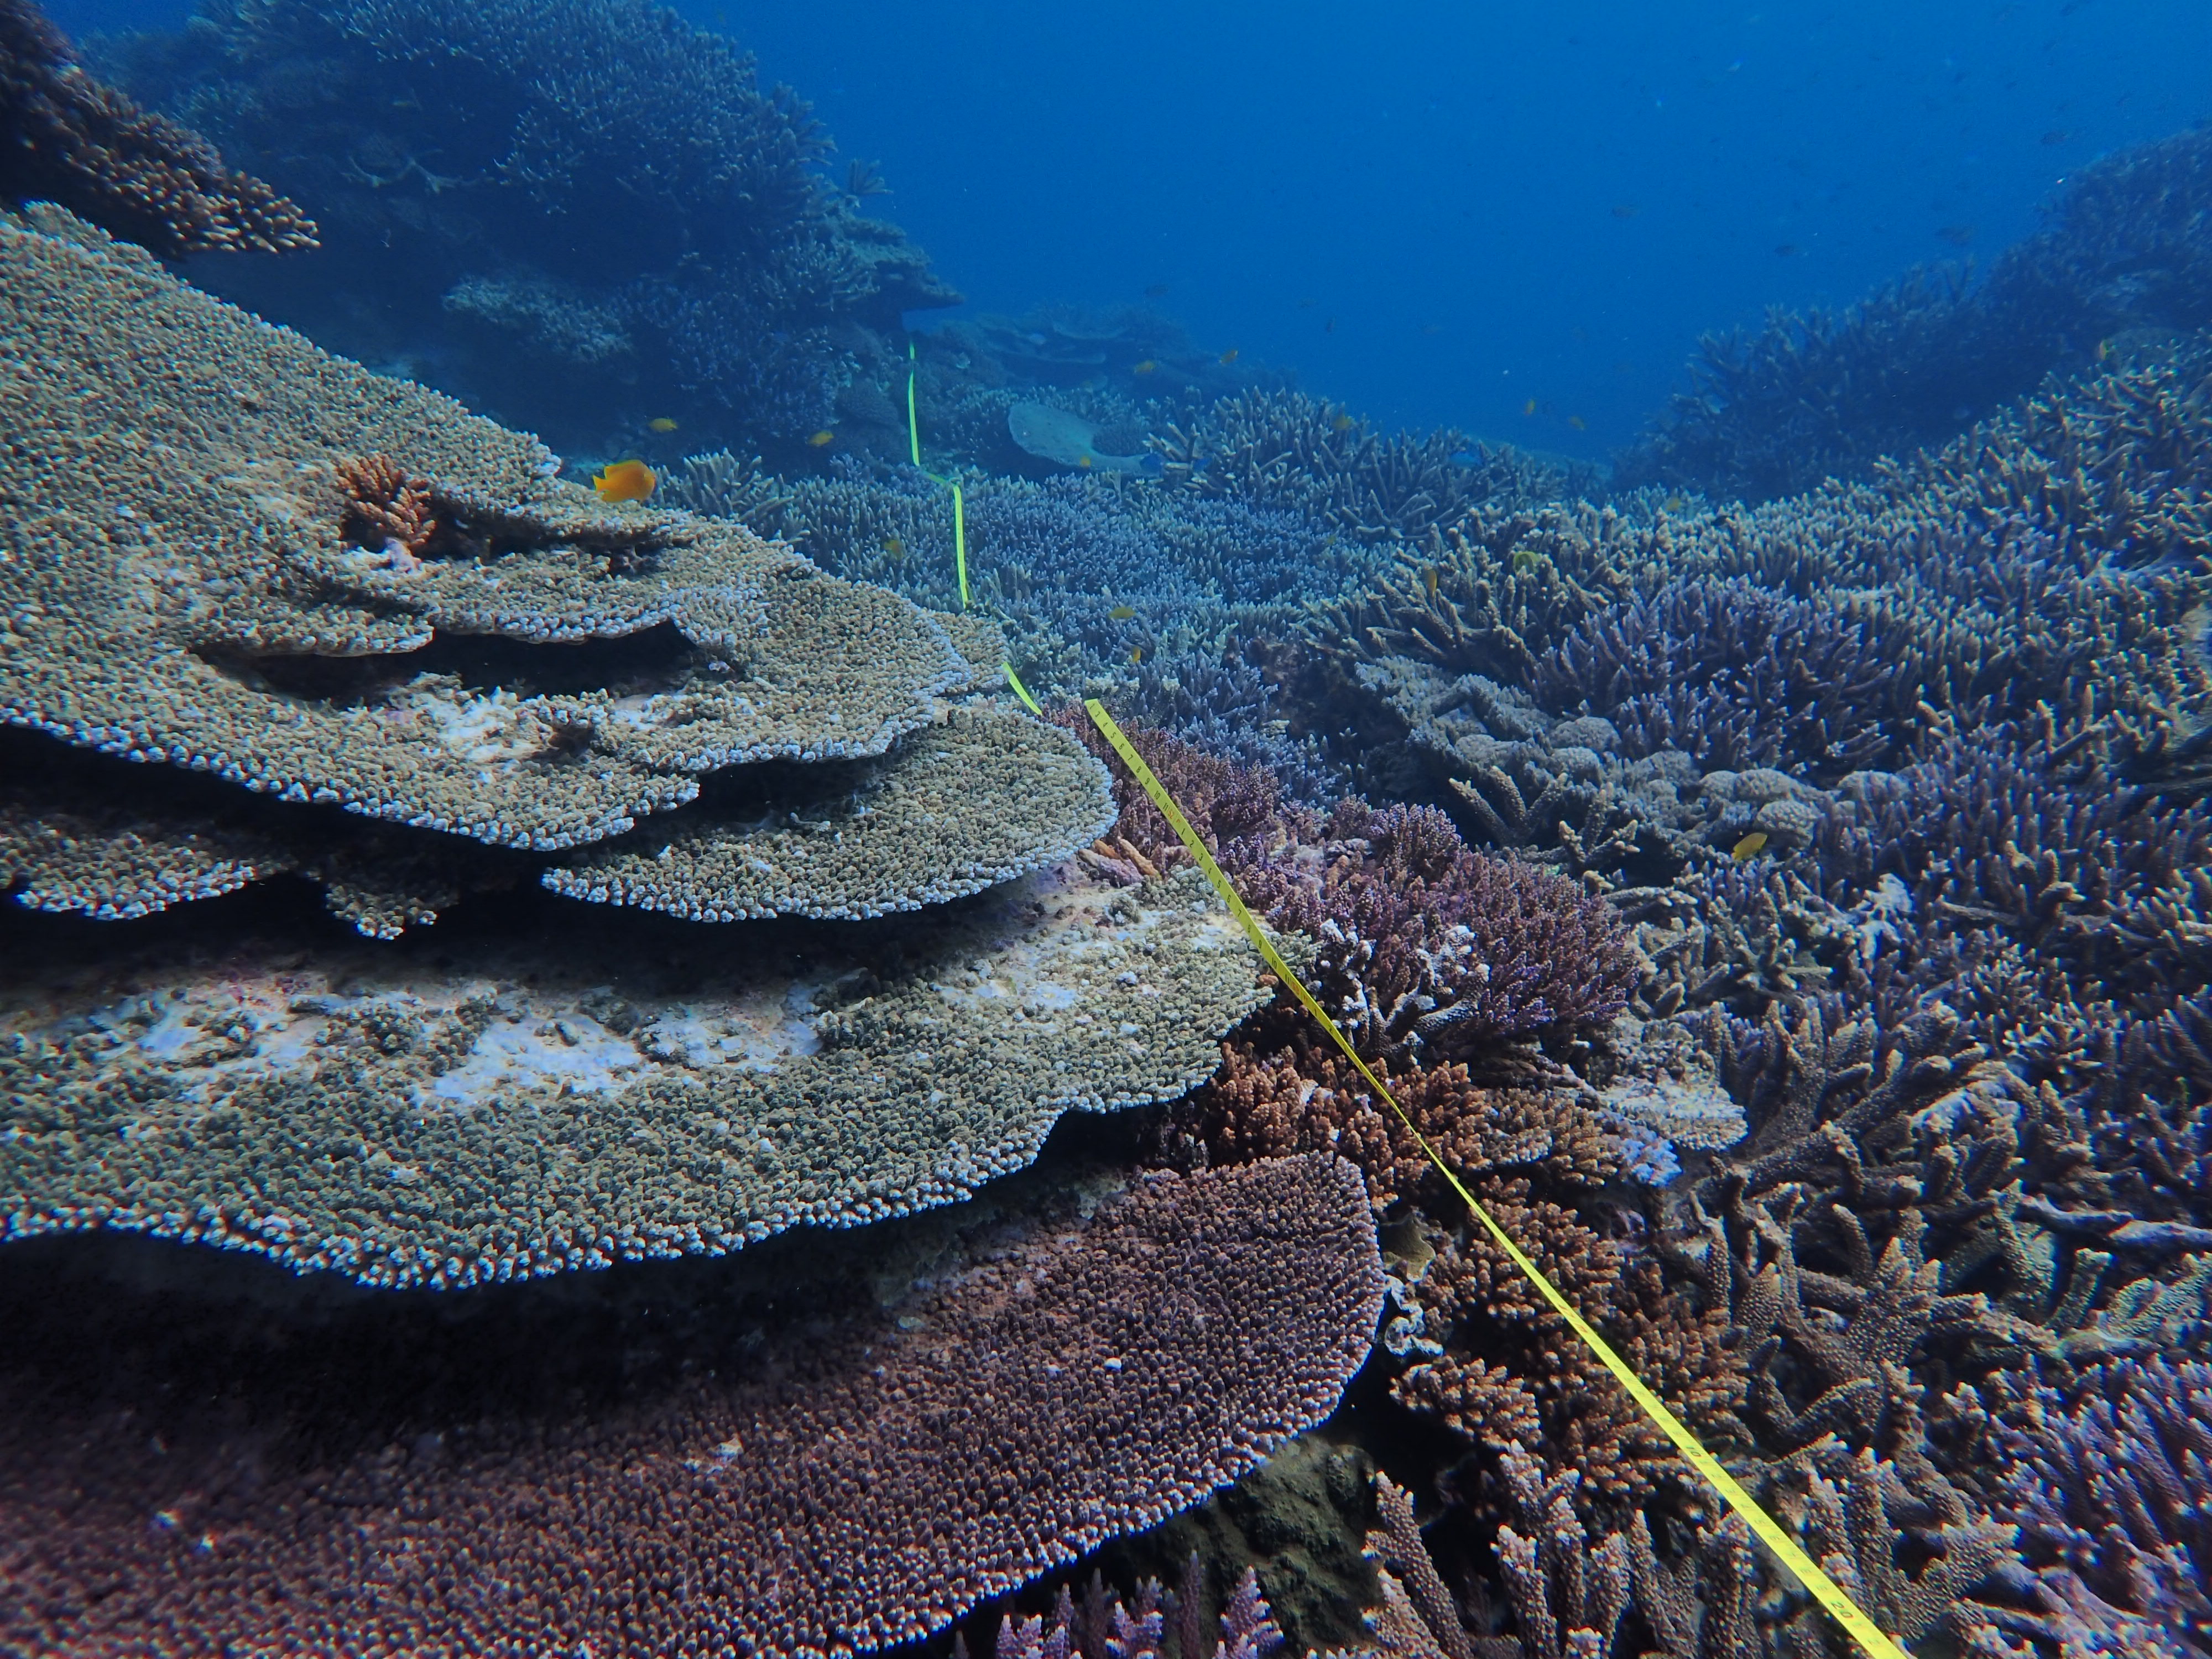 Transect for inshore coral monitoring in the southern Great Barrier Reef (Image courtesy of Gidarjil Development Corporation)